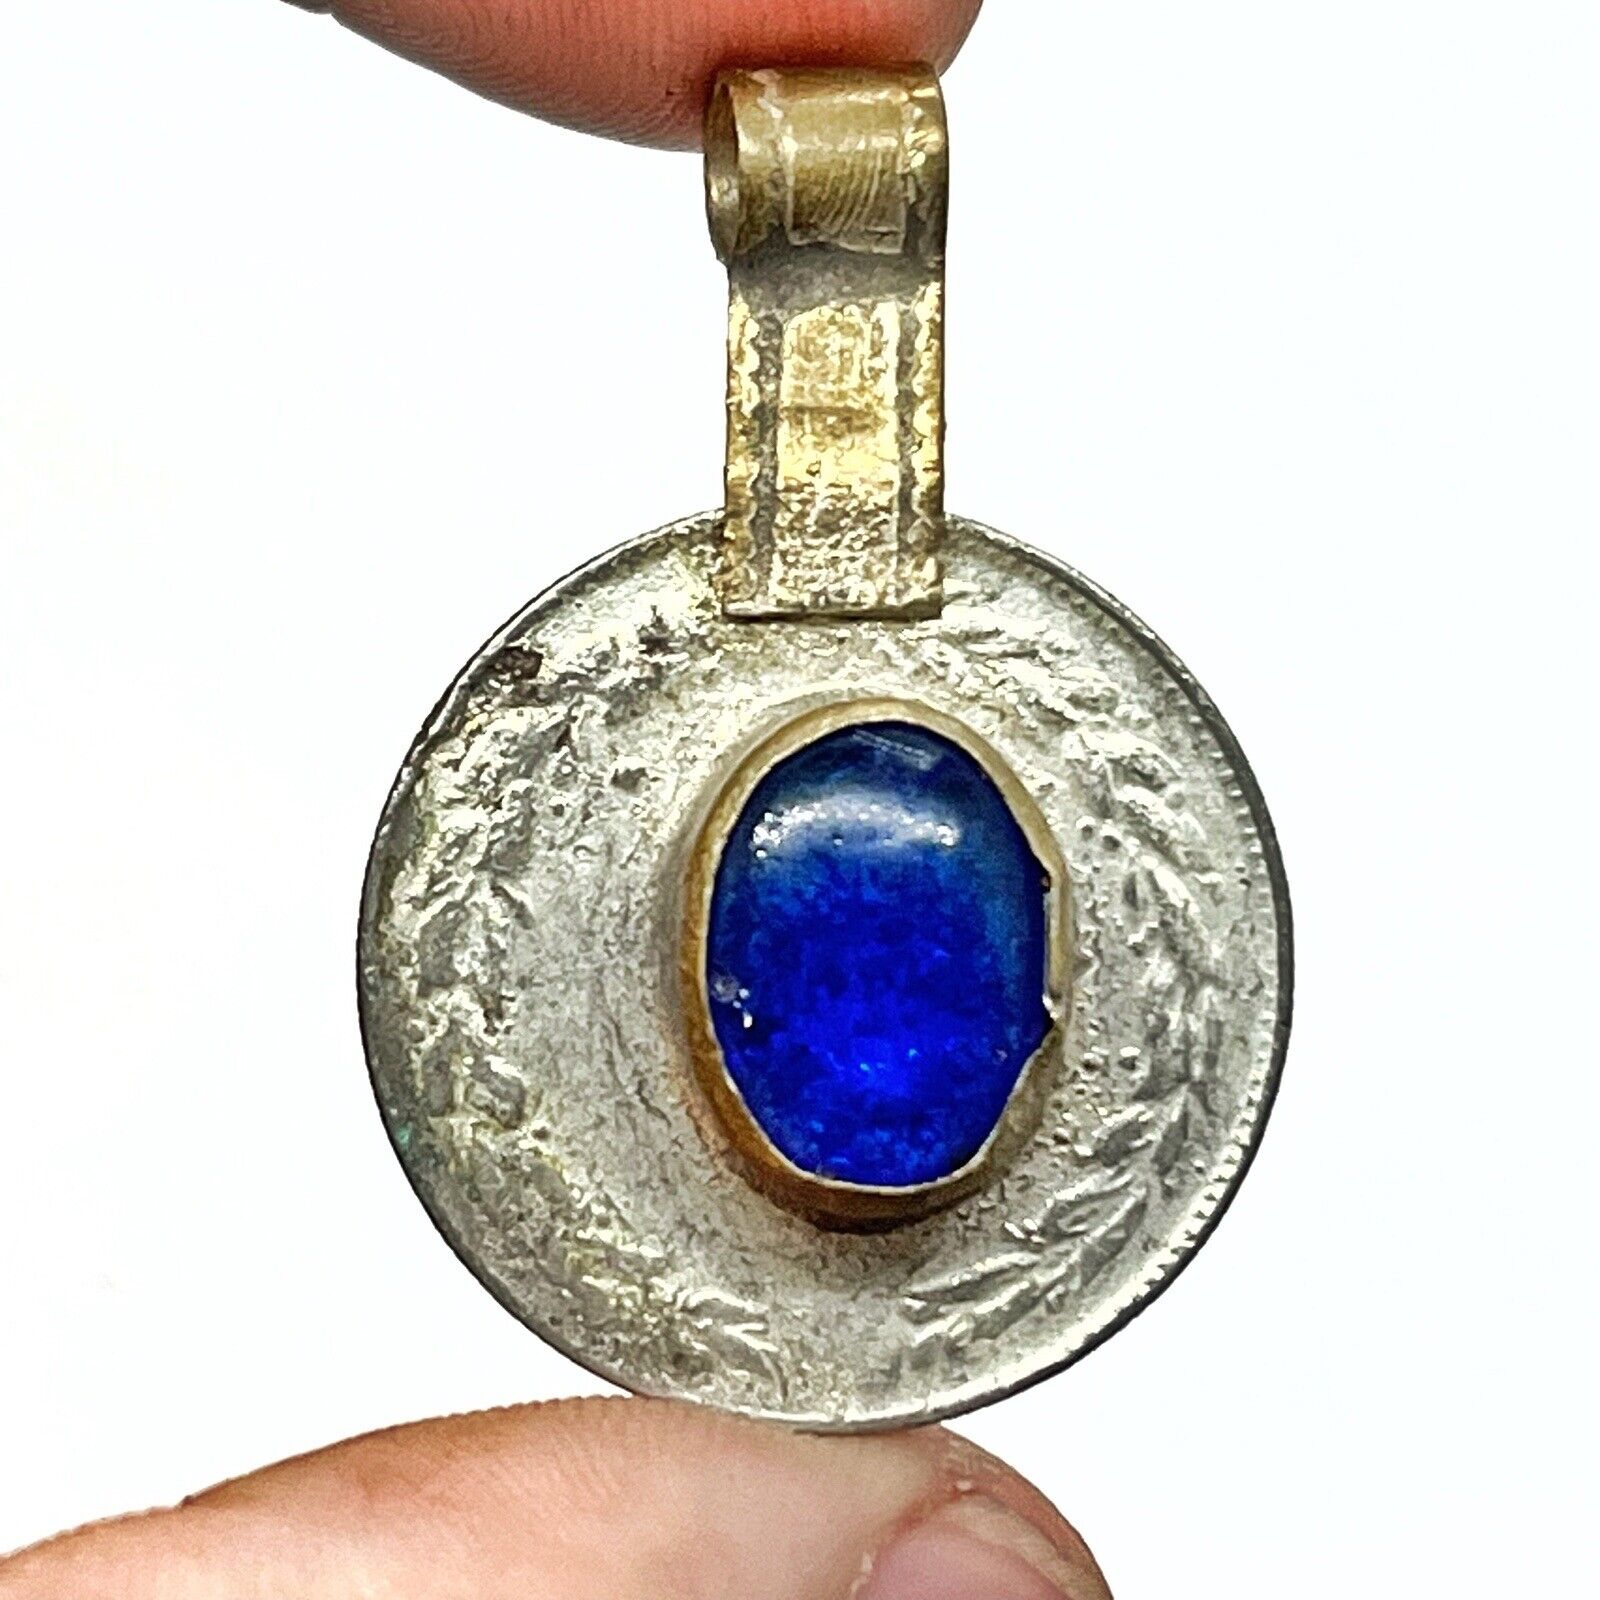 Middle Eastern Islamic Coin Pendant With Stone Charm Old Jewelry Rare Unique